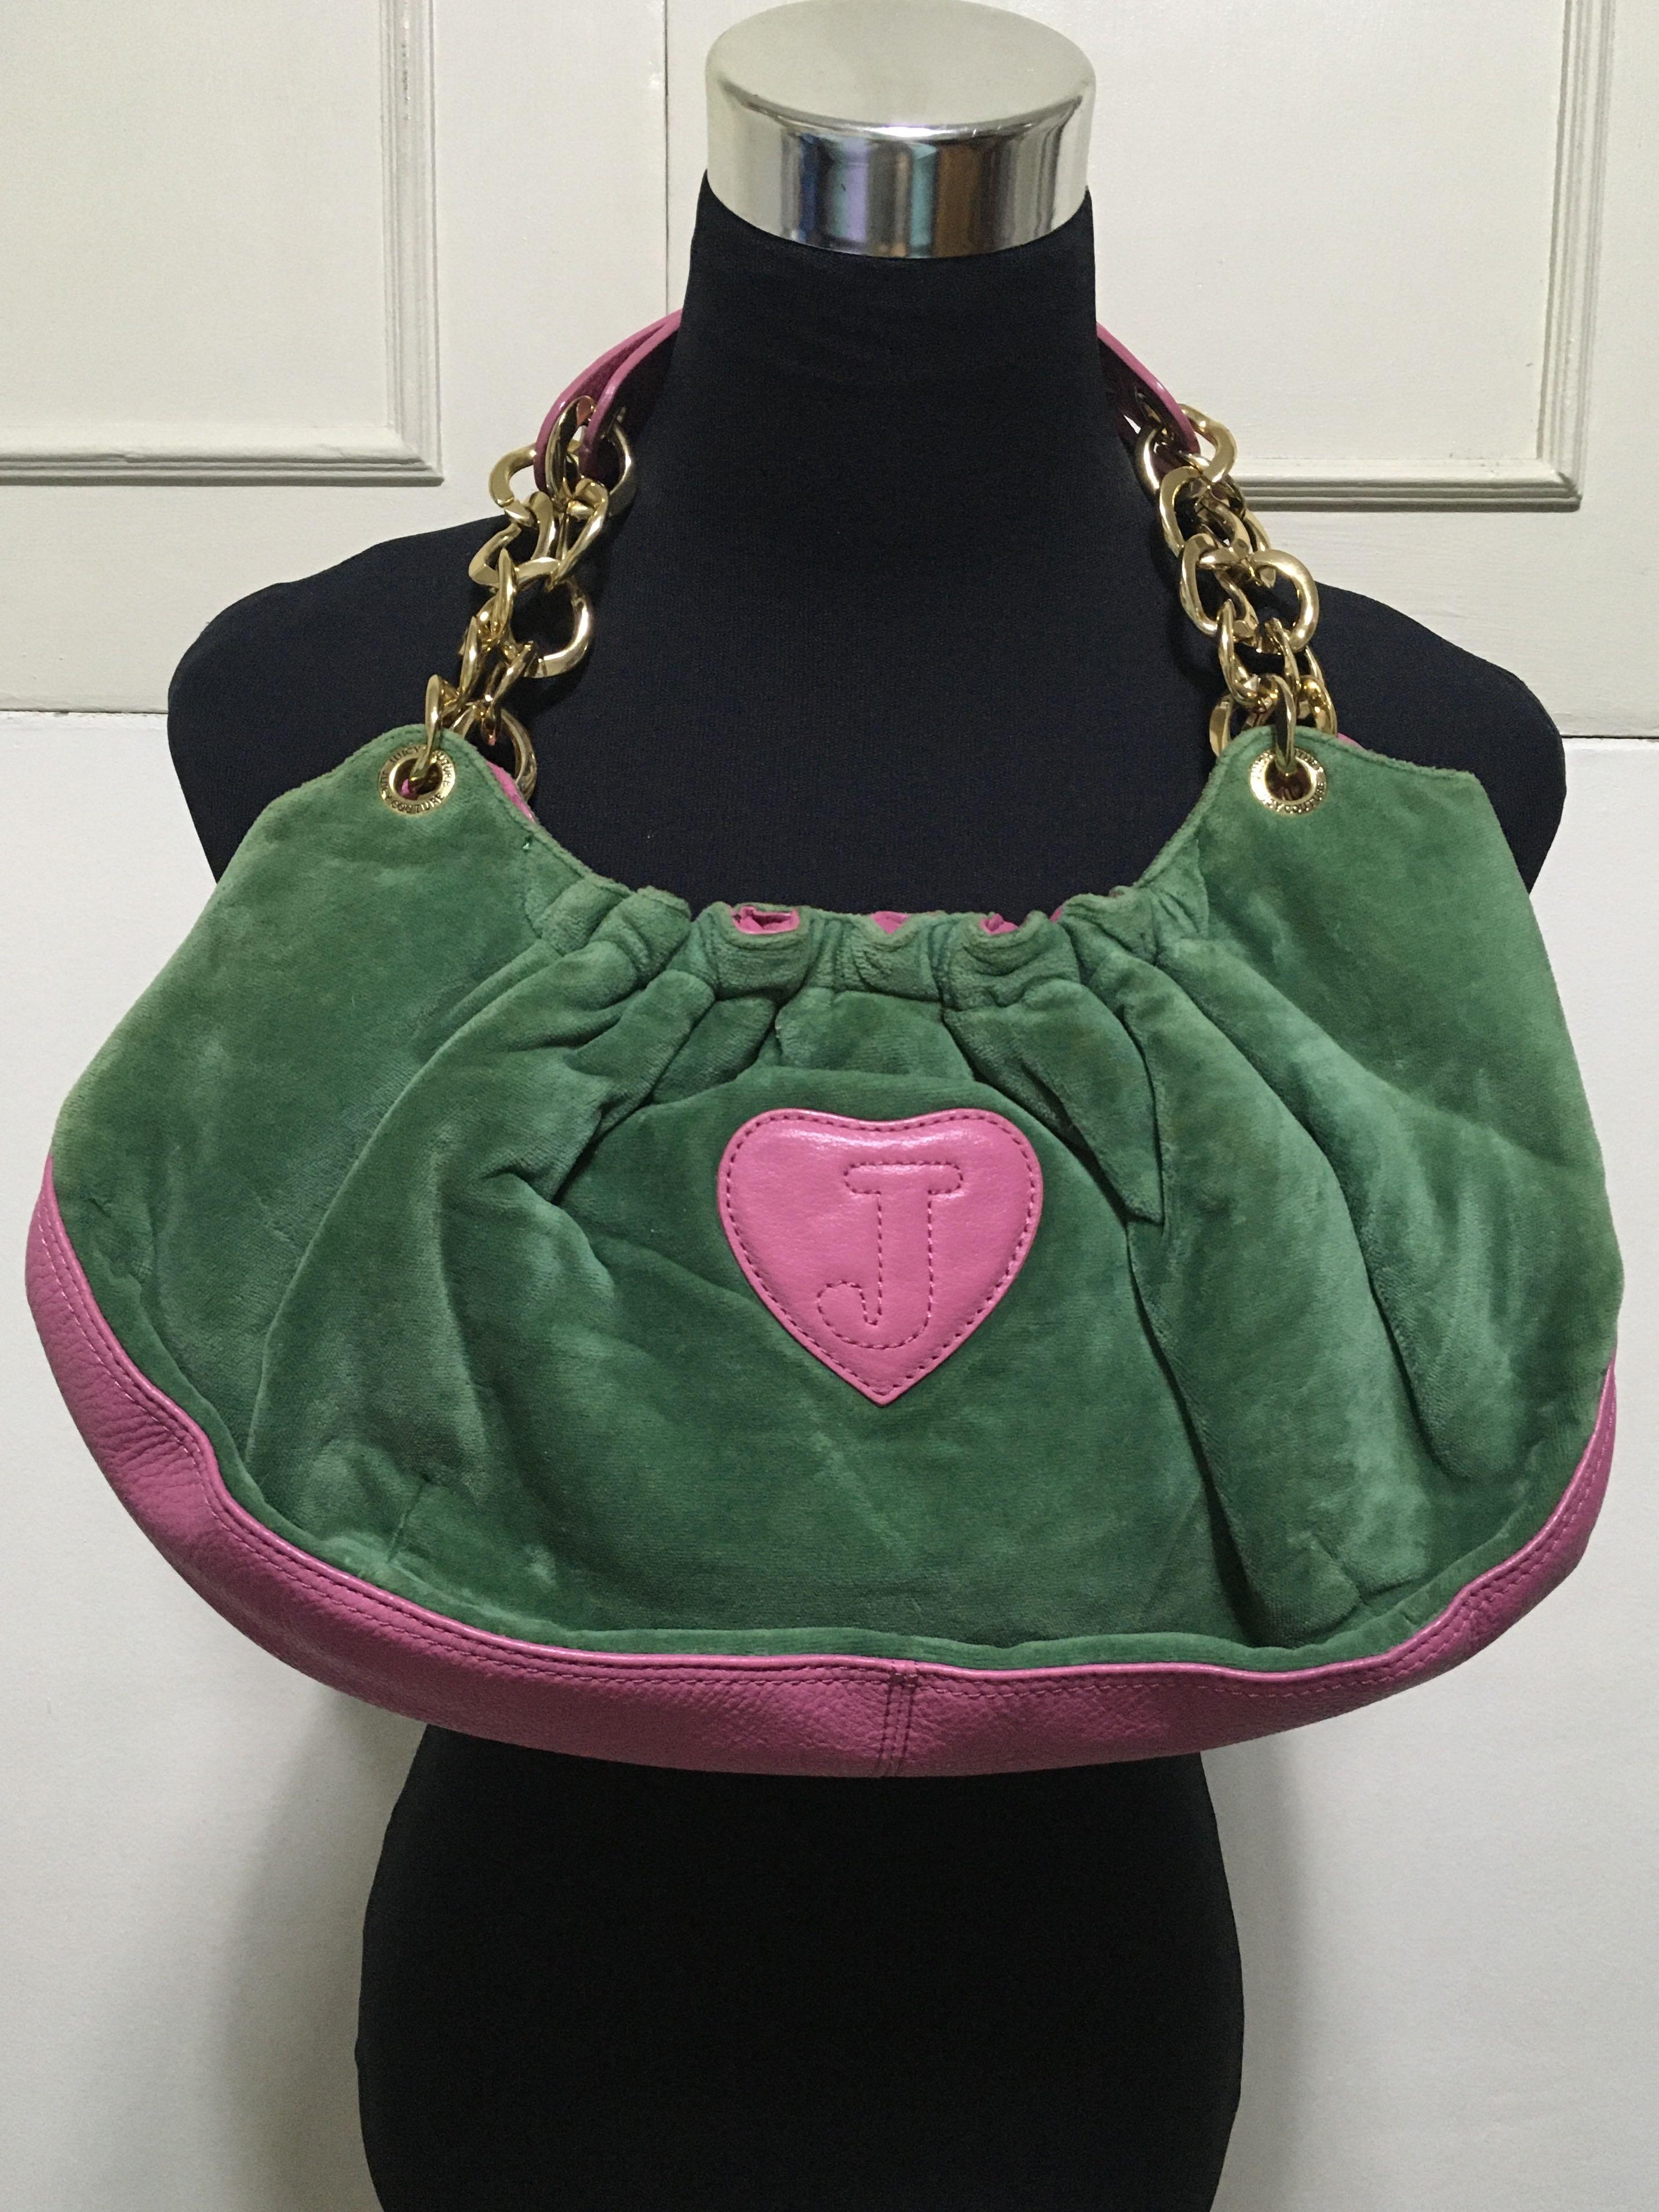 JUICY COUTURE SHOULDER BAG PRICE: - Madam's Pre-Loved Bags